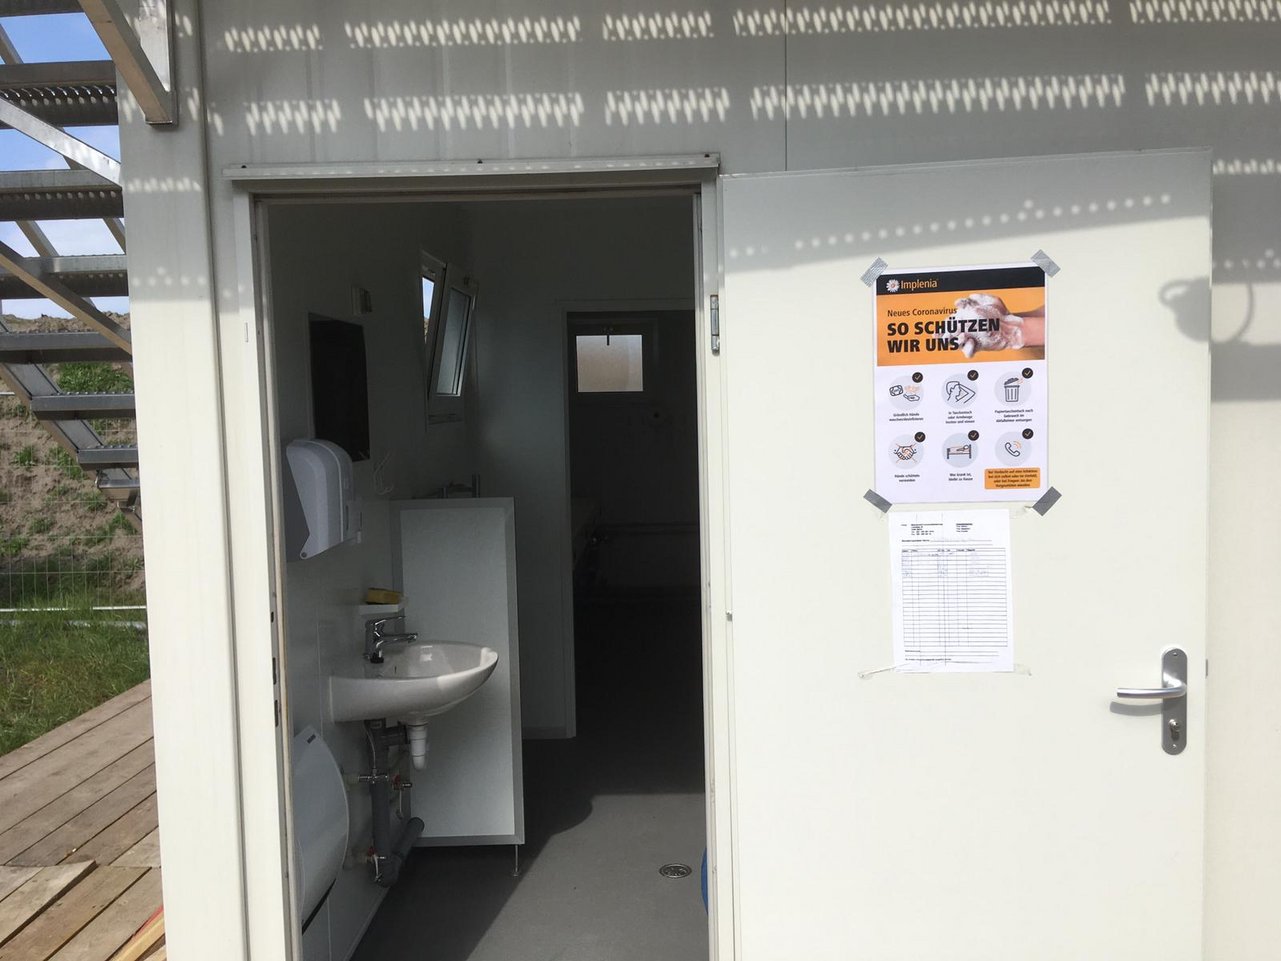 "Information and hygiene: Information posters are also hung in the sanitary facilities. "